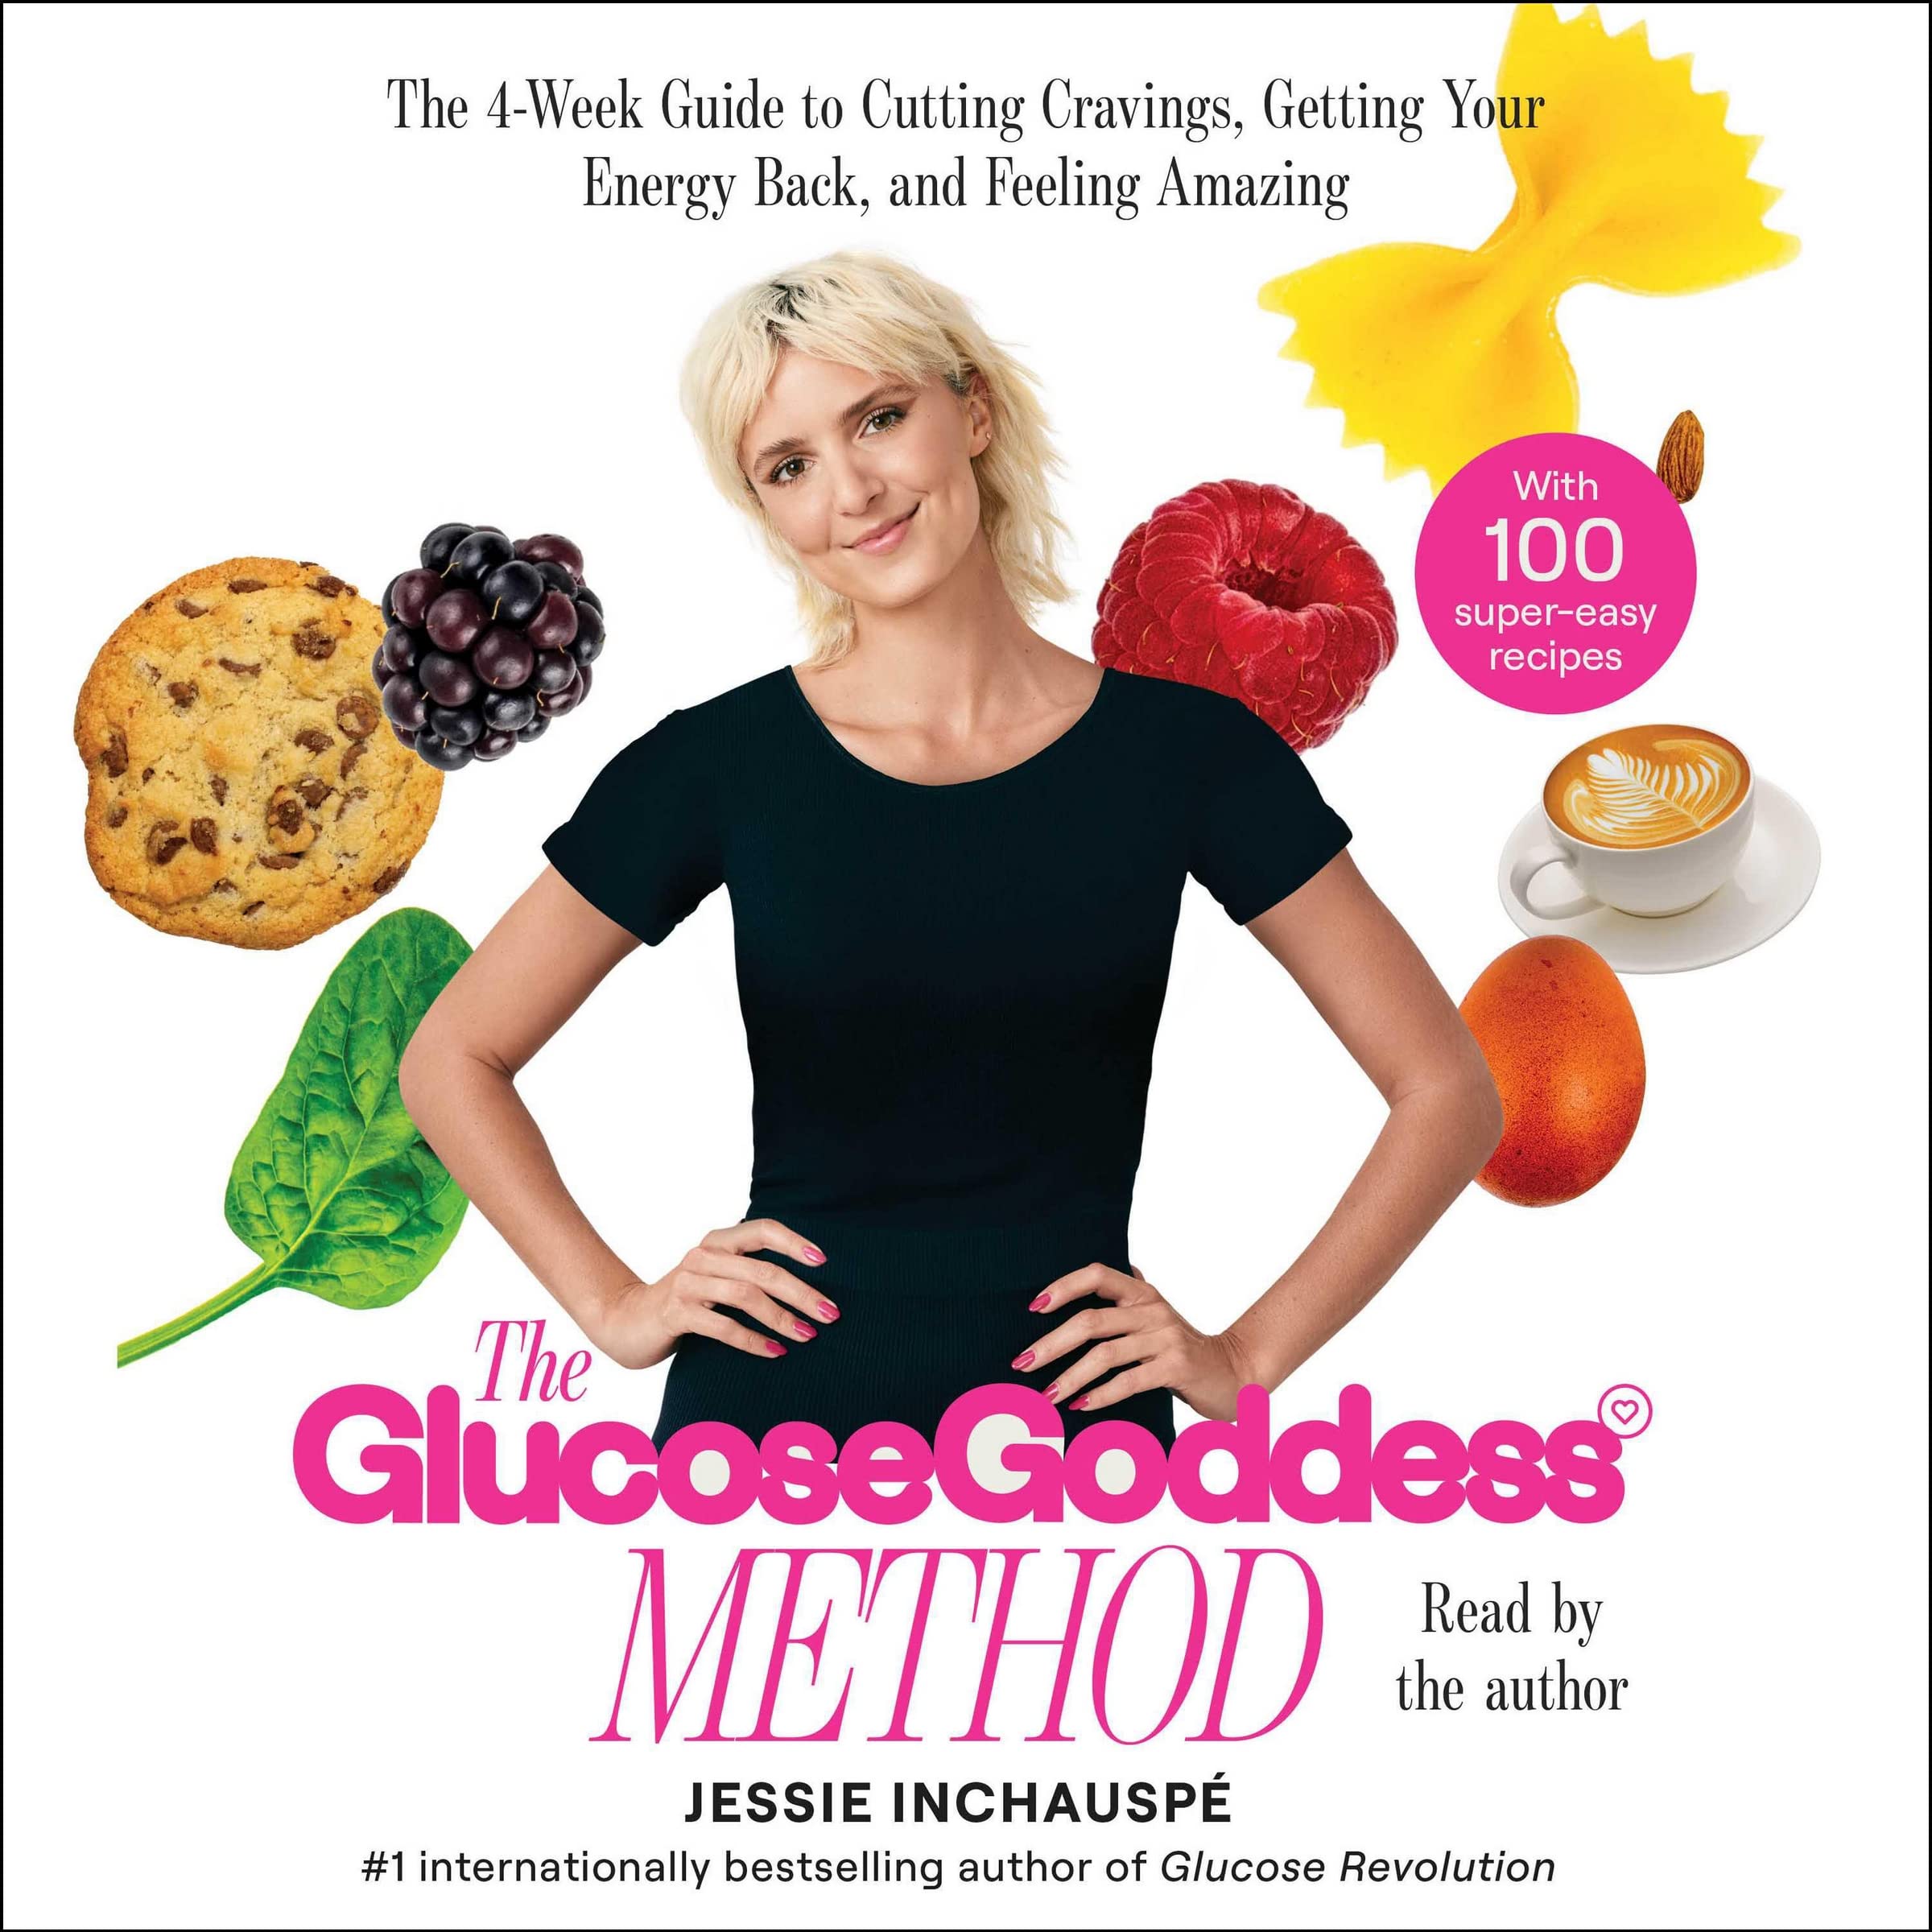 The Glucose Goddess Method: A 4-Week Guide to Cutting Cravings, Getting Your Energy Back, and Feeling Amazing